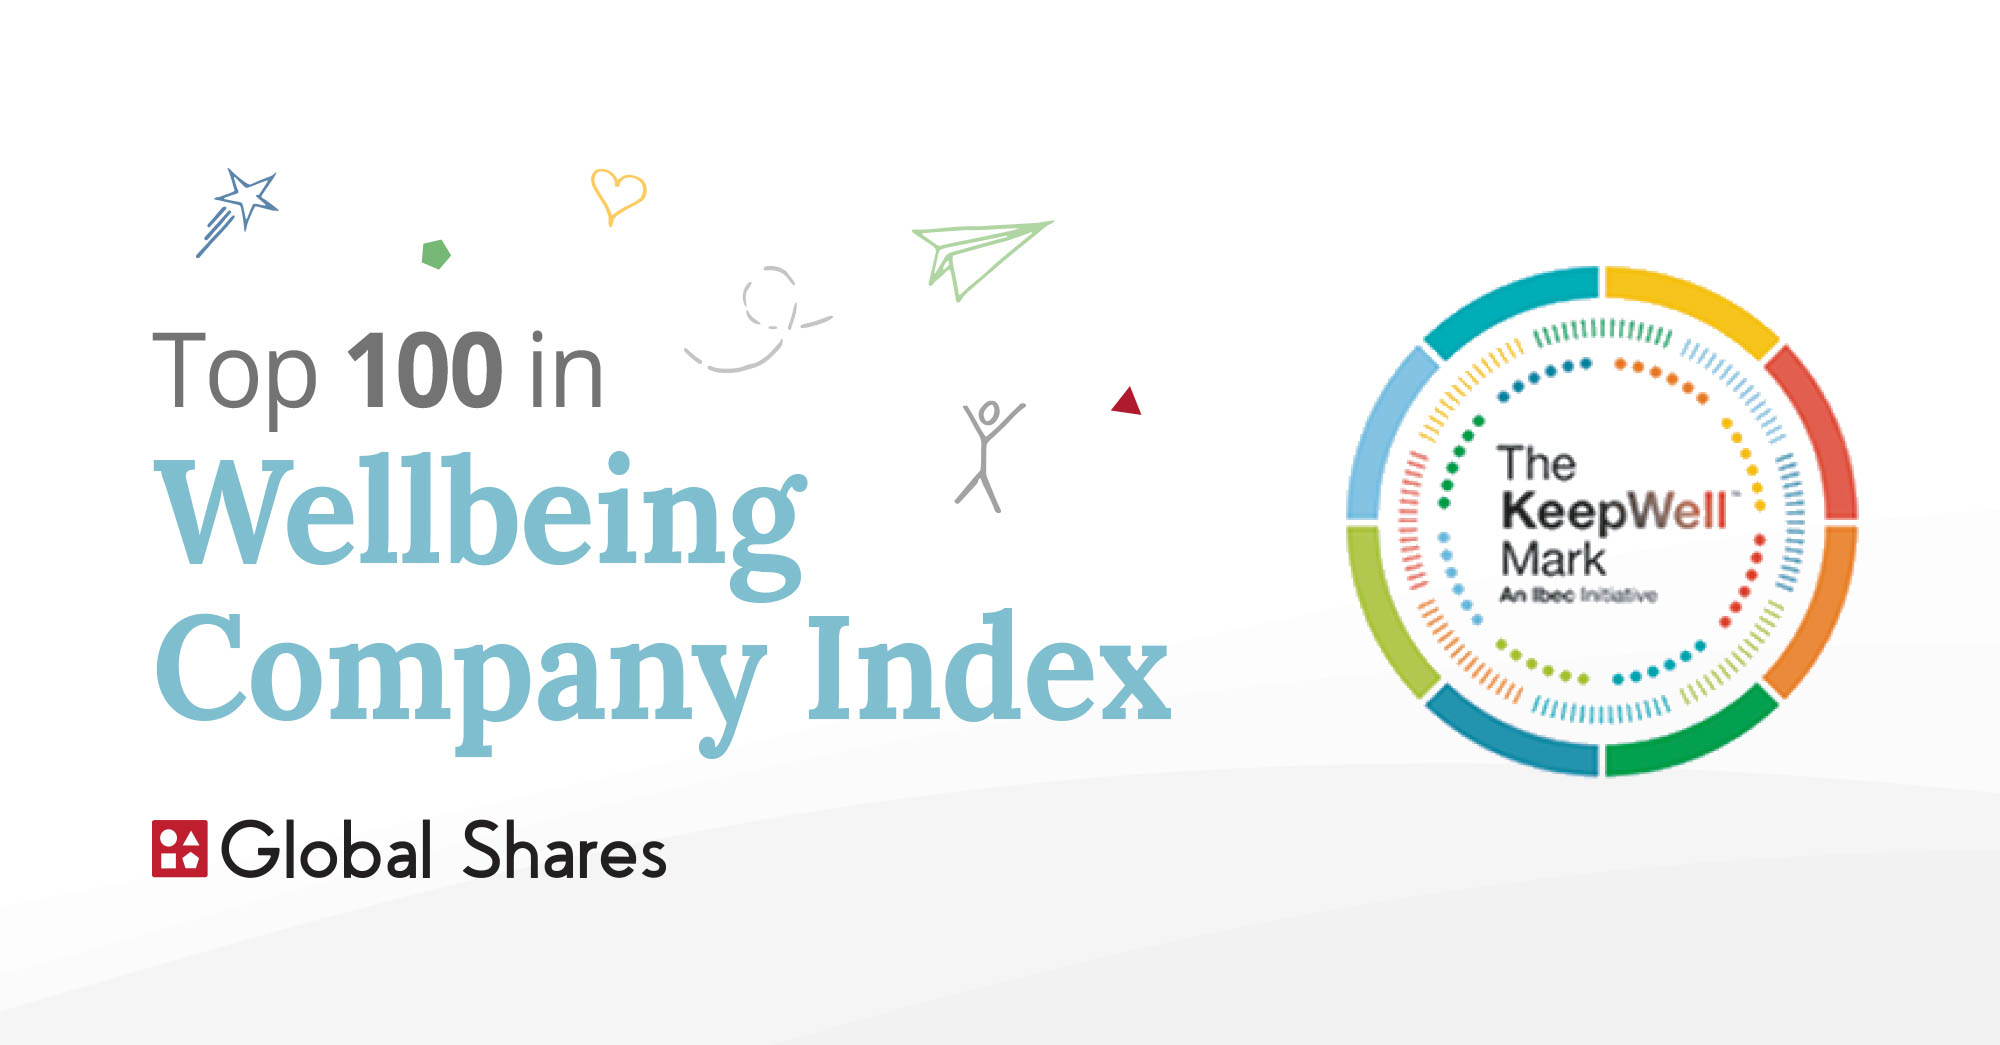 We’re in the ‘Top 100 in Wellbeing Company Index’